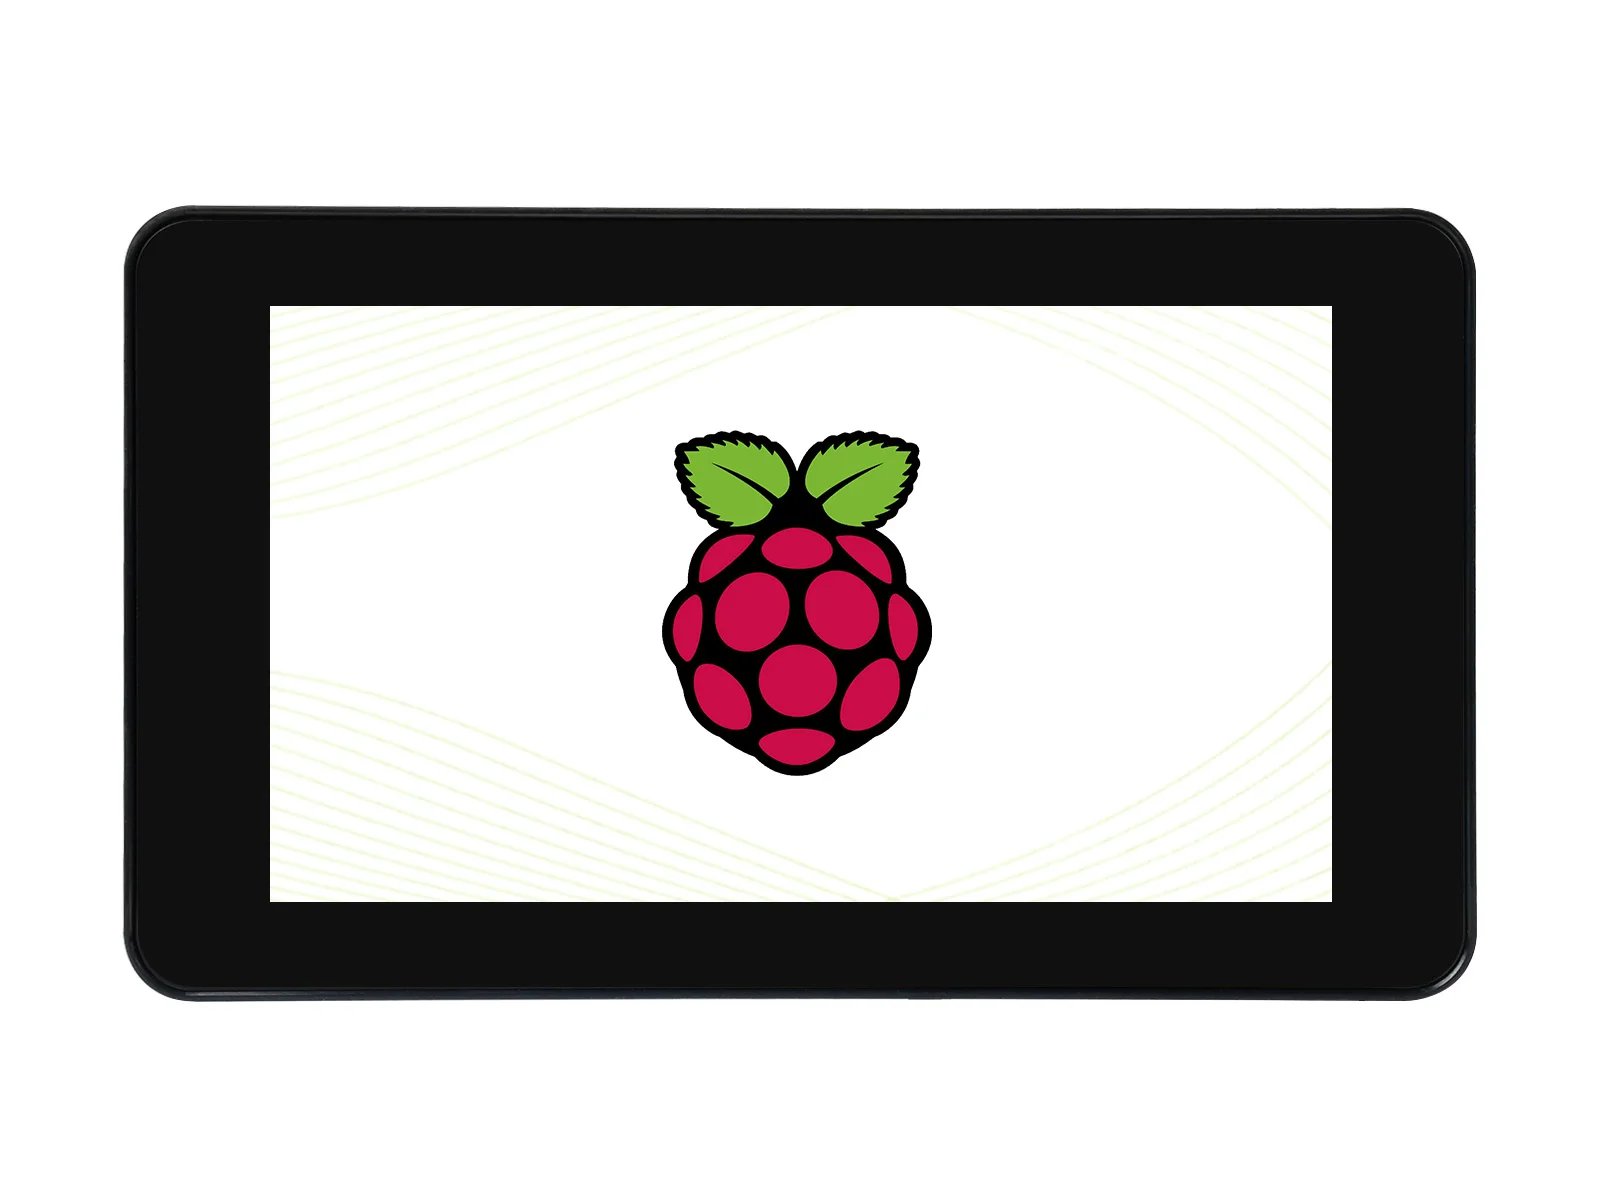 

7inch DSI LCD Type C,With Protection Case,Capacitive Touch IPS Display,For Raspberry Pi,1024×600 Resolution,Supports Pi 4B